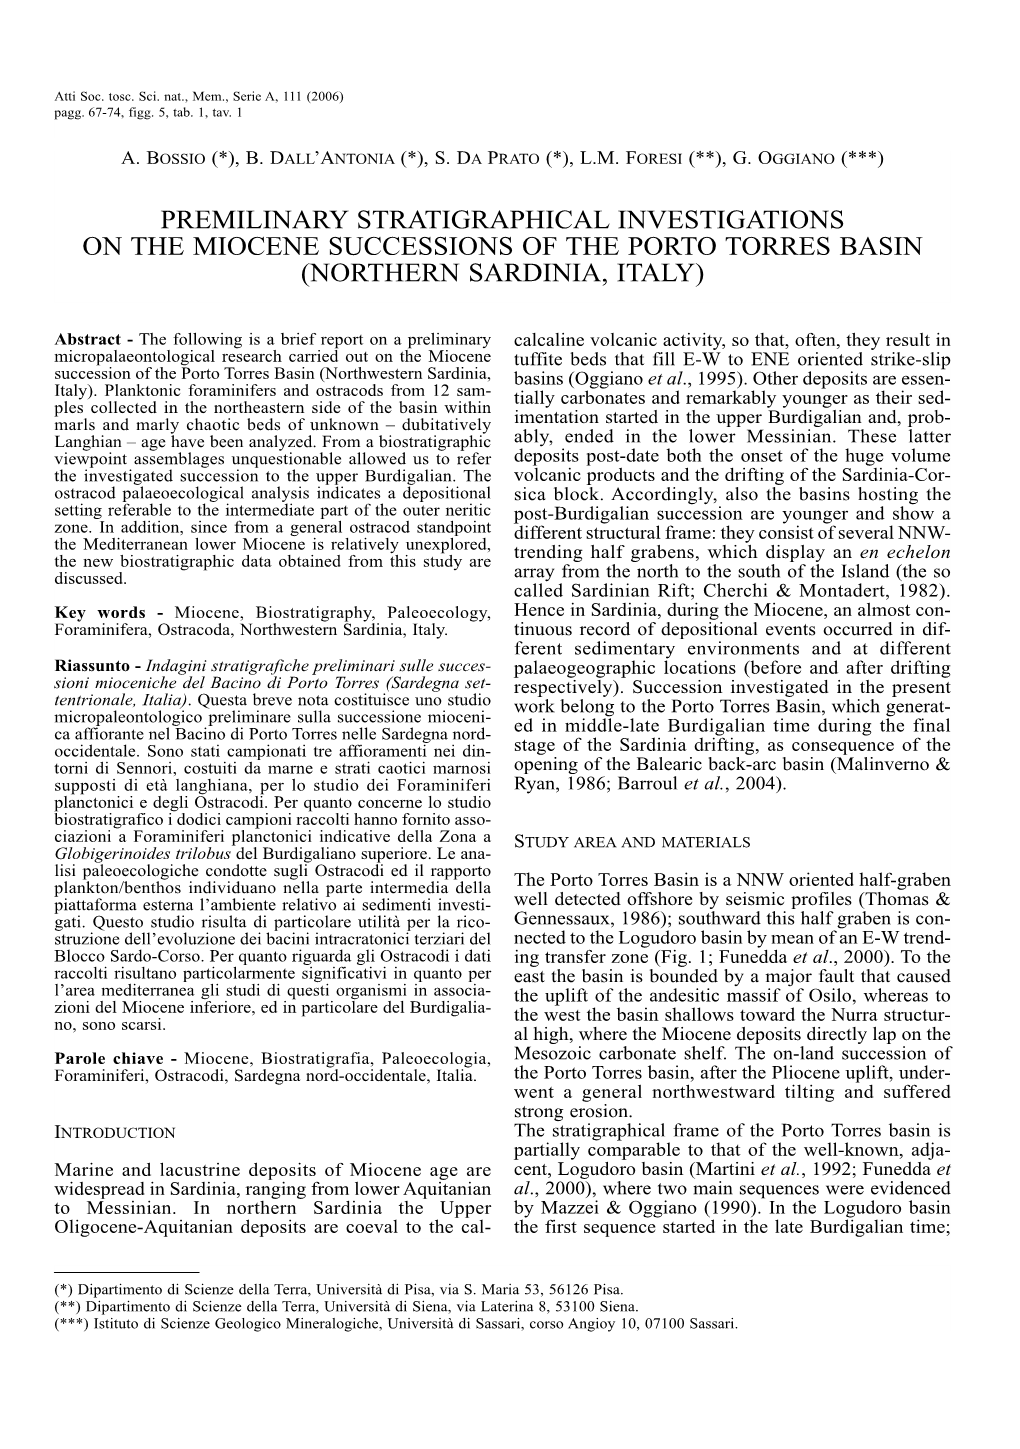 Premilinary Stratigraphical Investigations on the Miocene Successions of the Porto Torres Basin (Northern Sardinia, Italy)